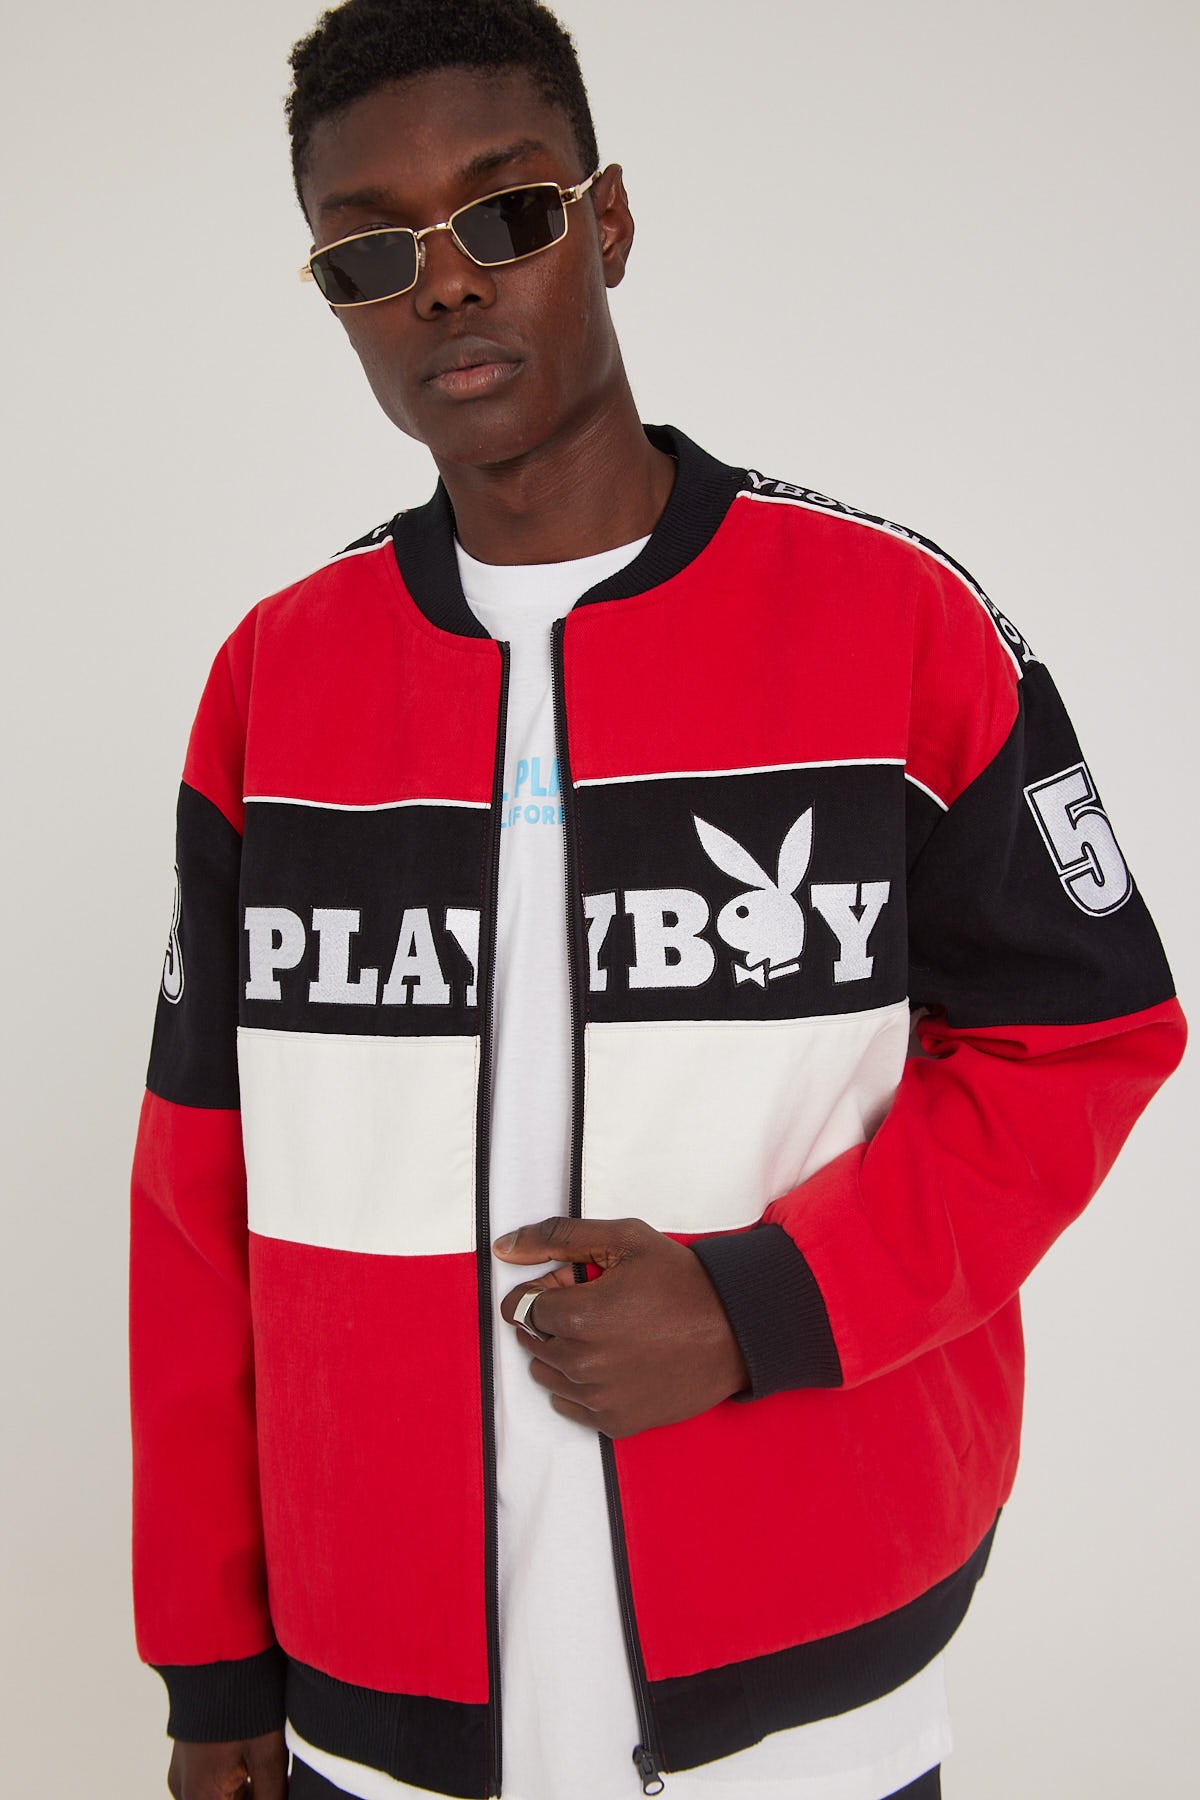 Playboy Race Car Bunny Jacket Red – Universal Store